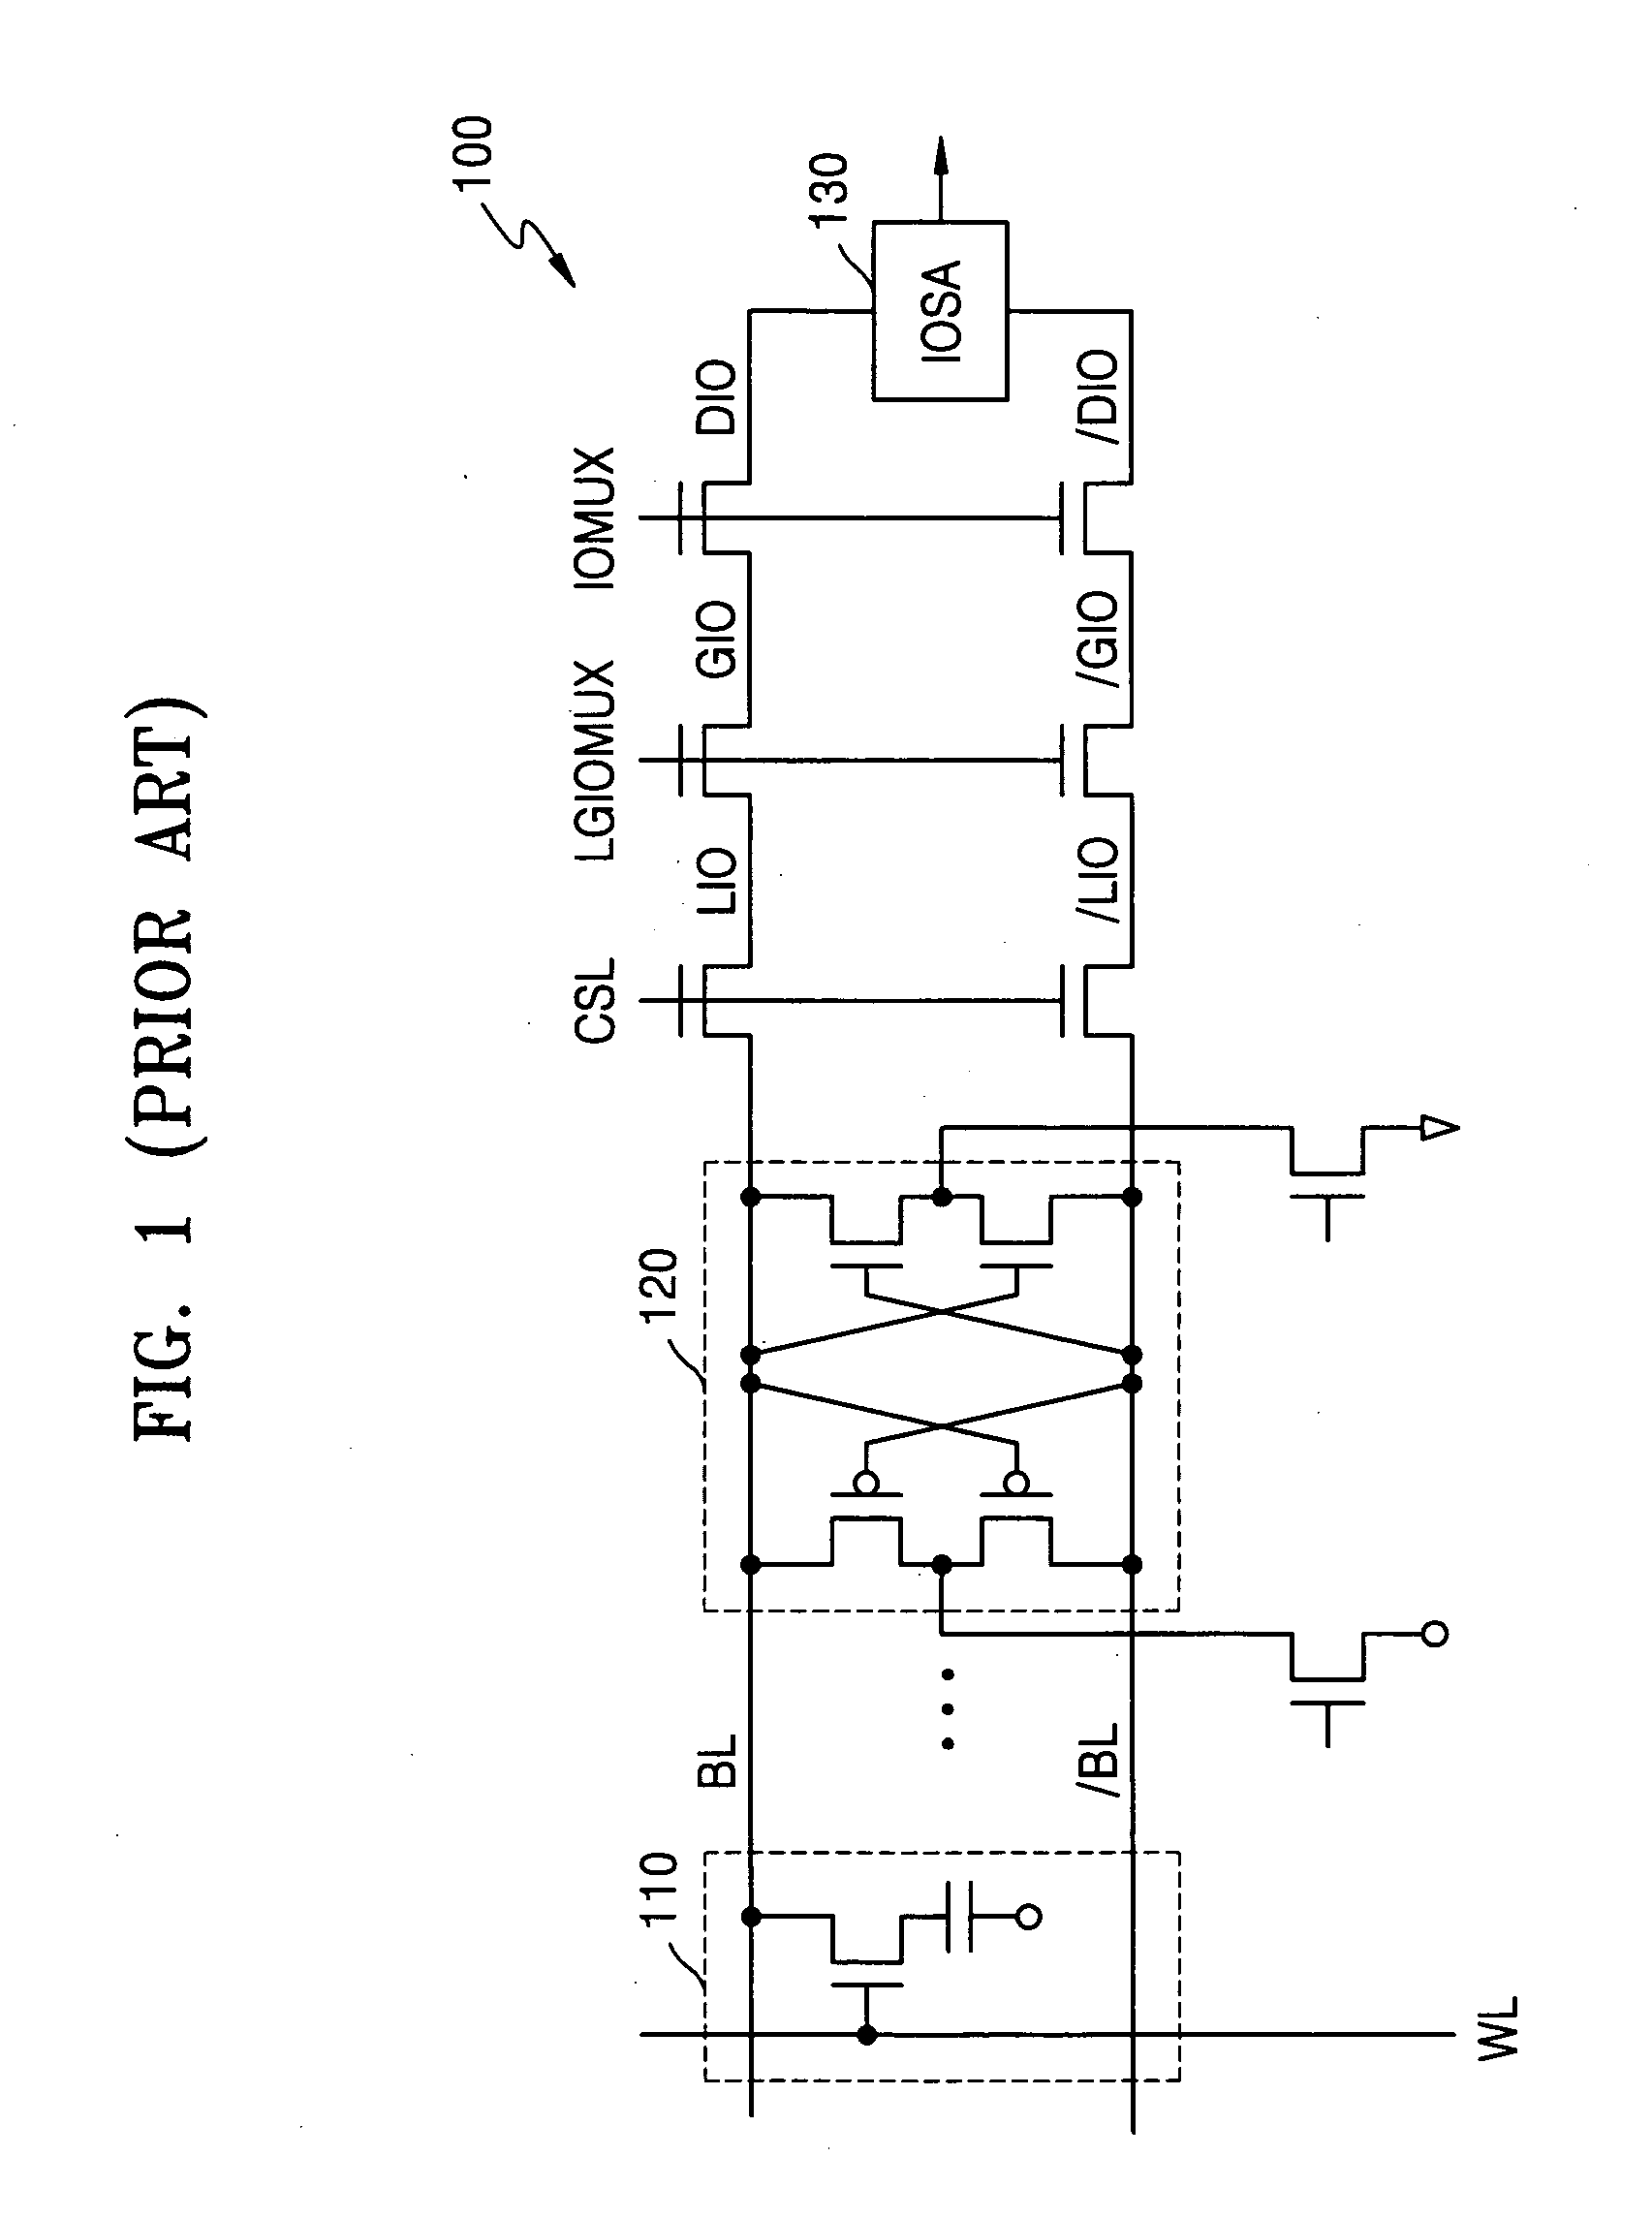 Semiconductor memory device having local sense amplifier with on/off control